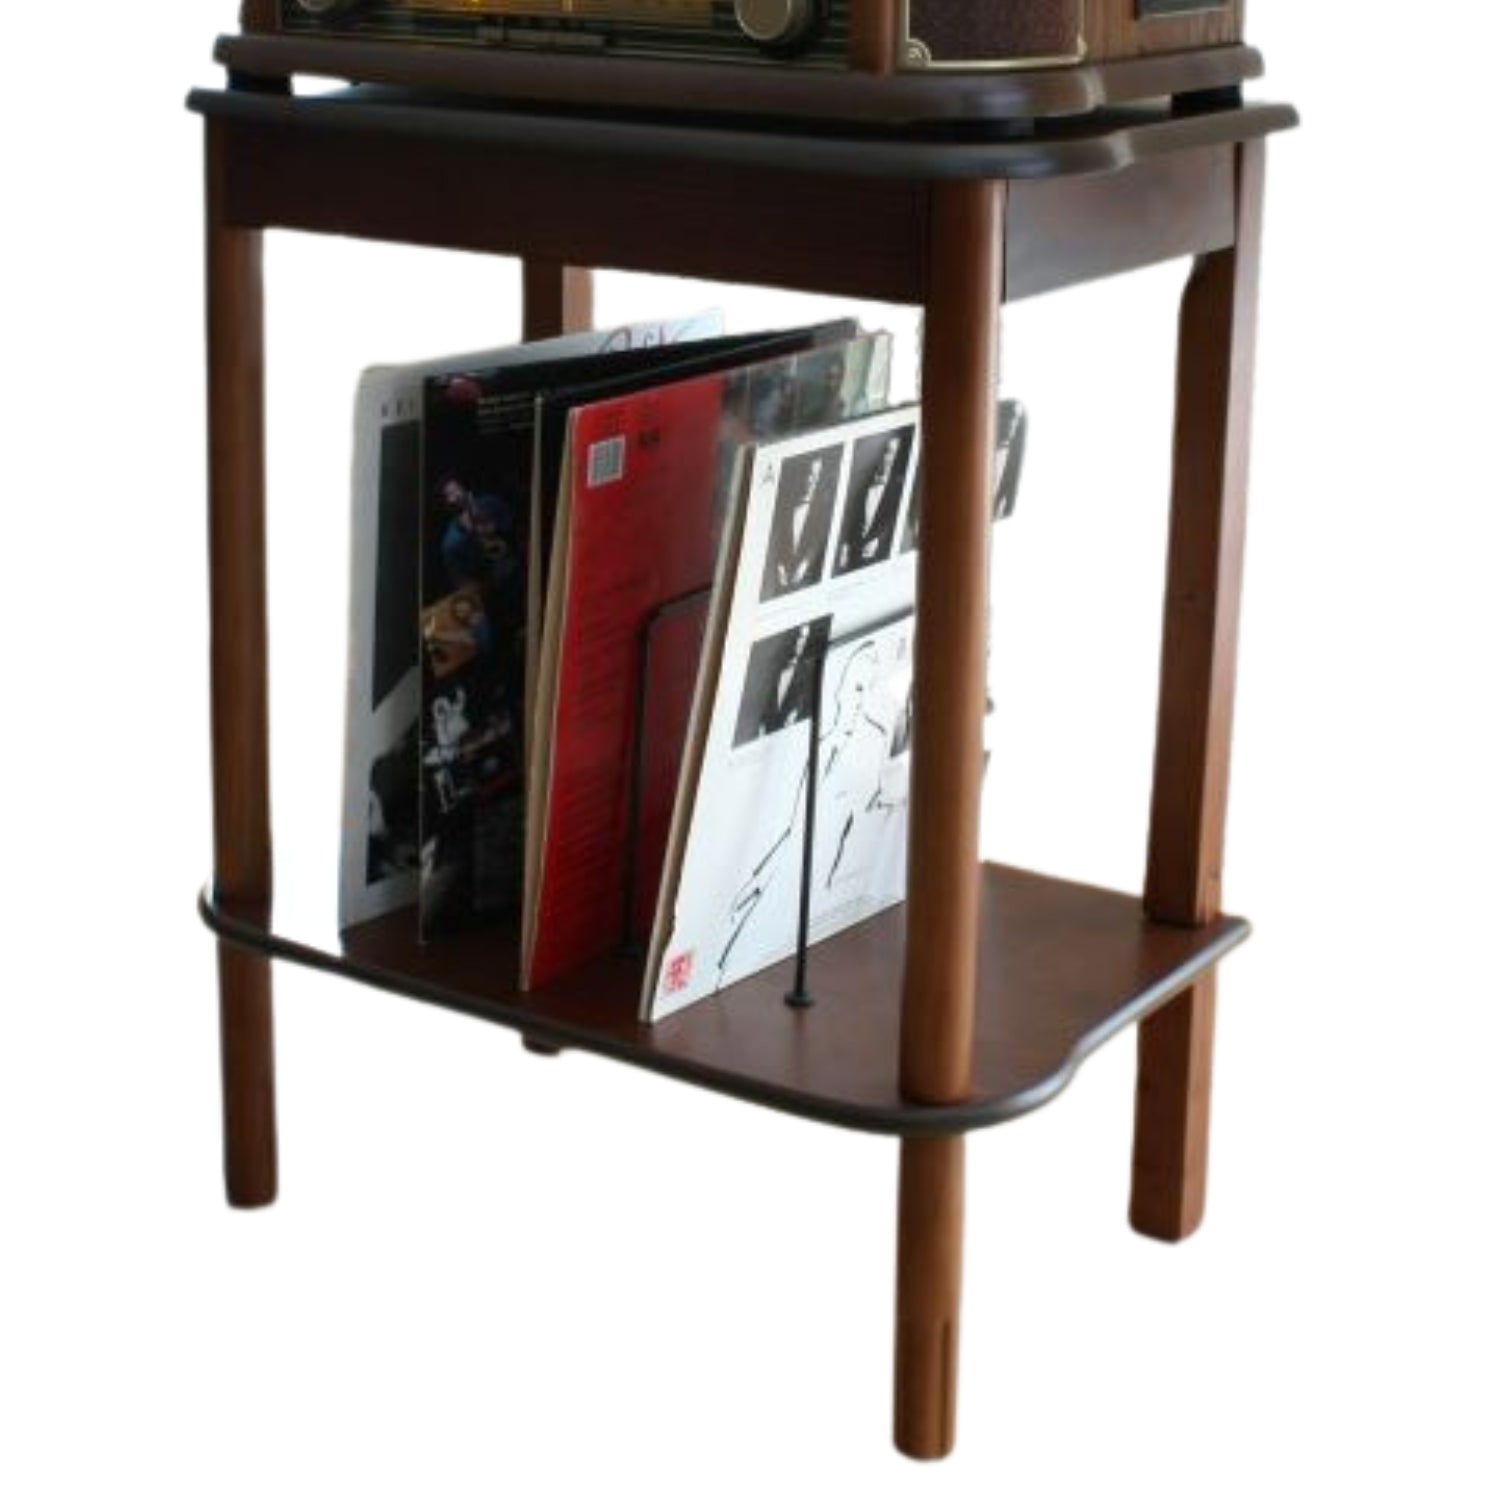 Soundmaster SF510 record stand wooden stand hifi furniture base frame for nostalgic devices including NR546BE NR540 NR560 NR566BR